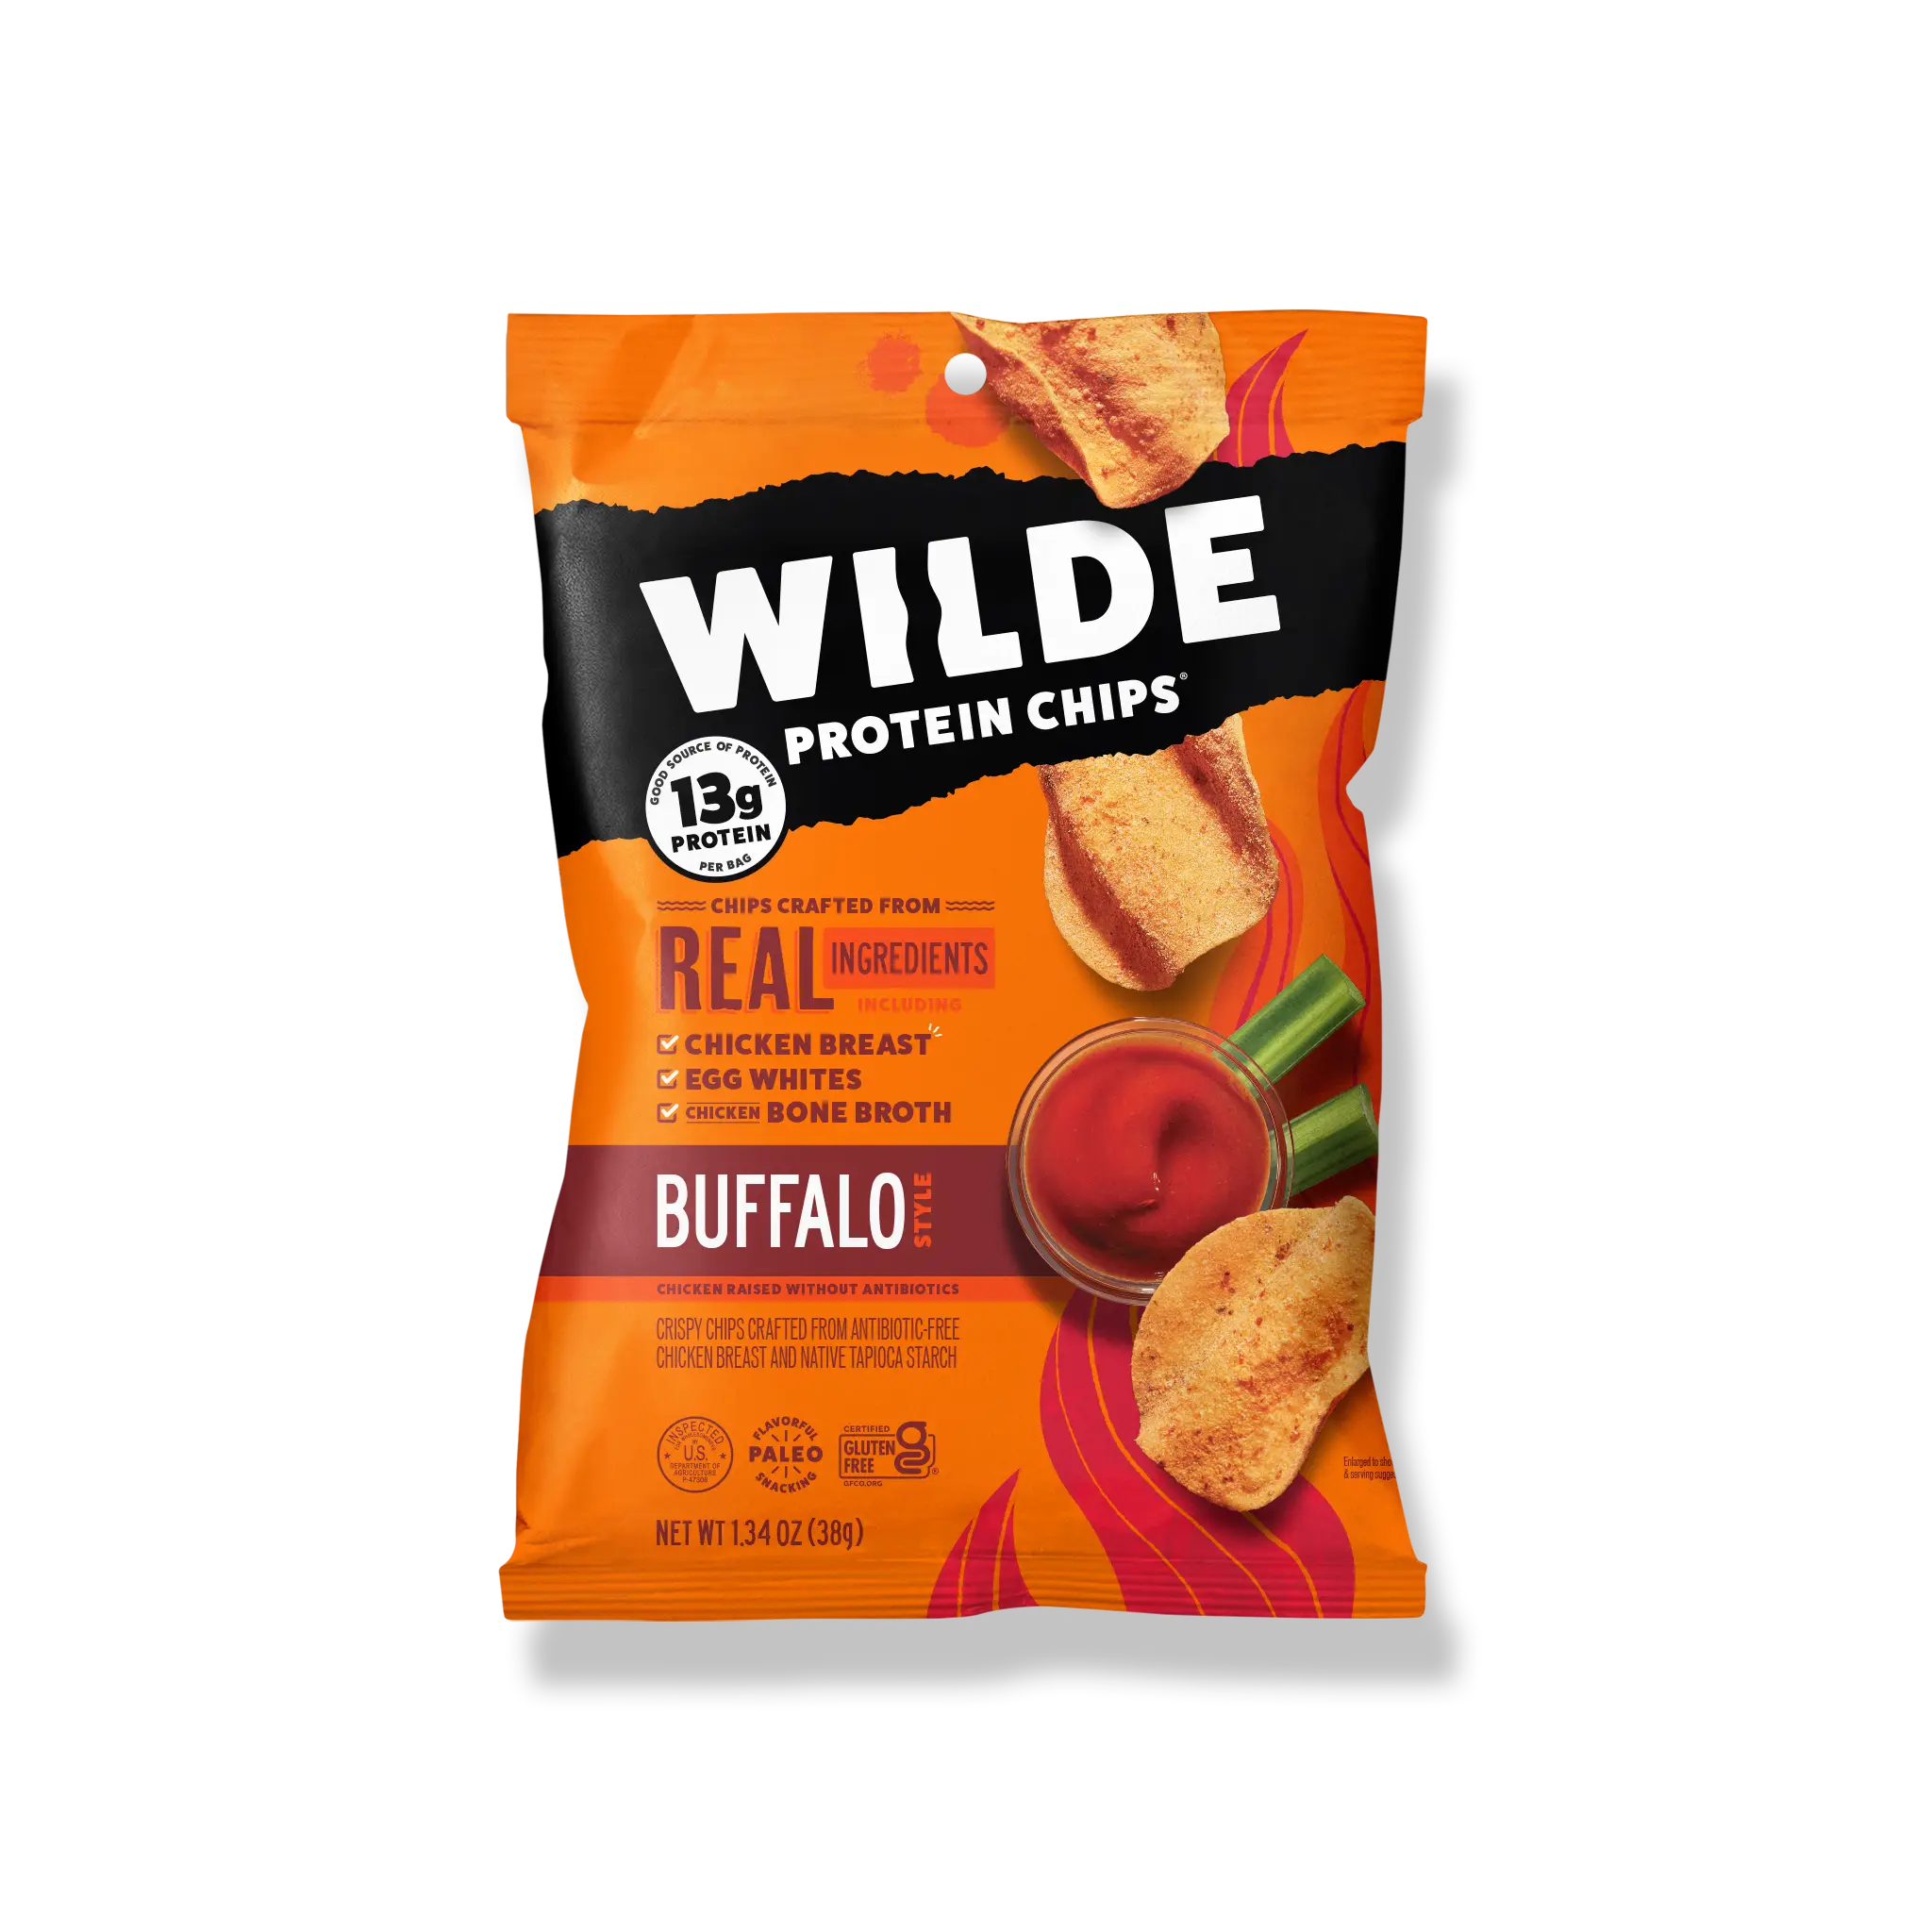 Buffalo Style WILDE Chips - Tangy & Spicy: Protein Chips Made From 